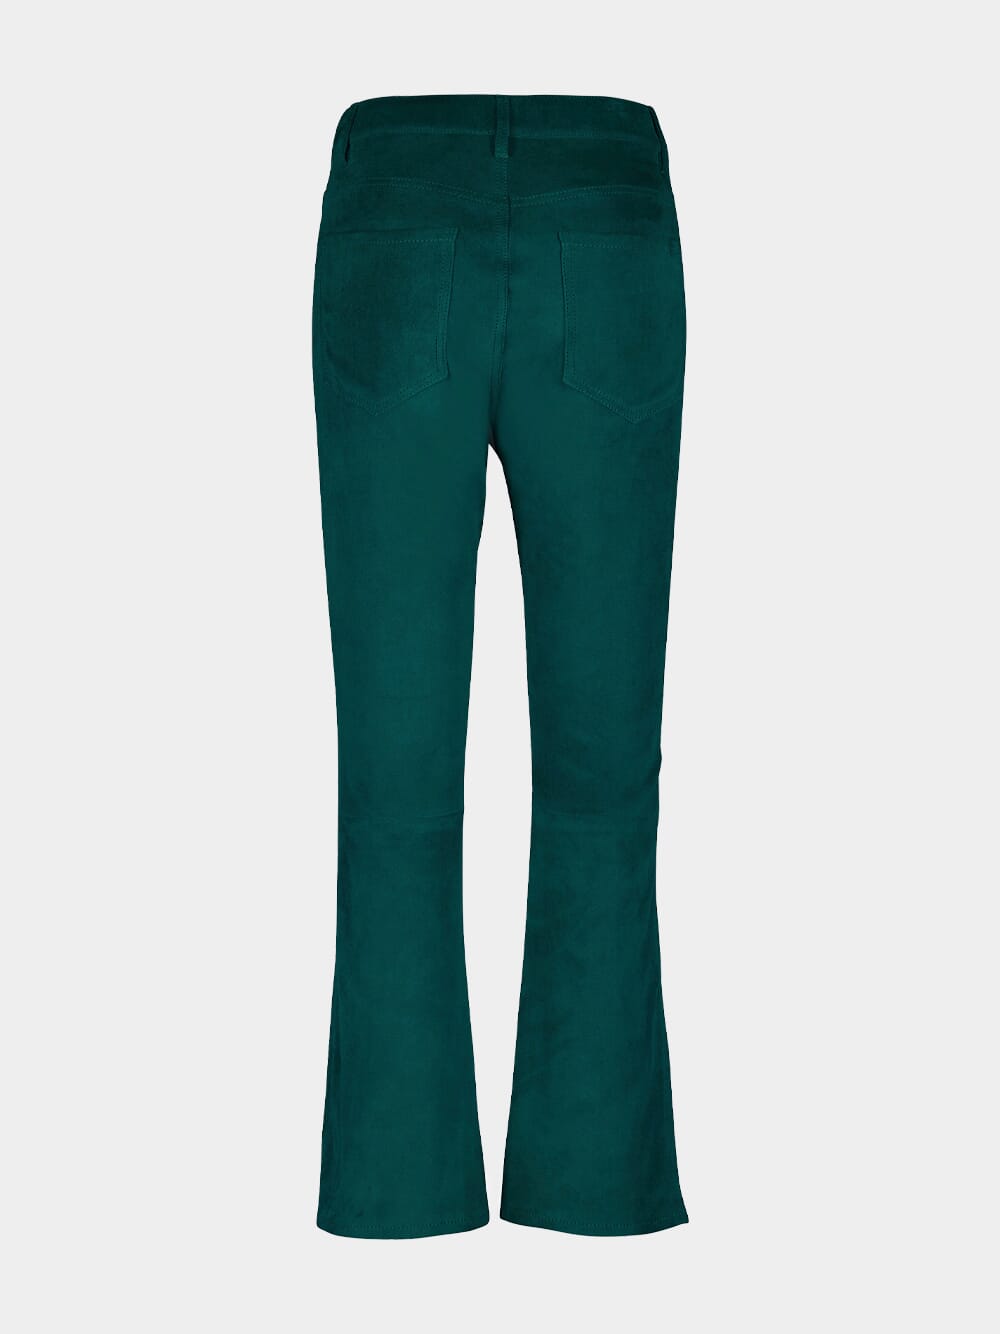 PAULA flared suede trousers - Blue